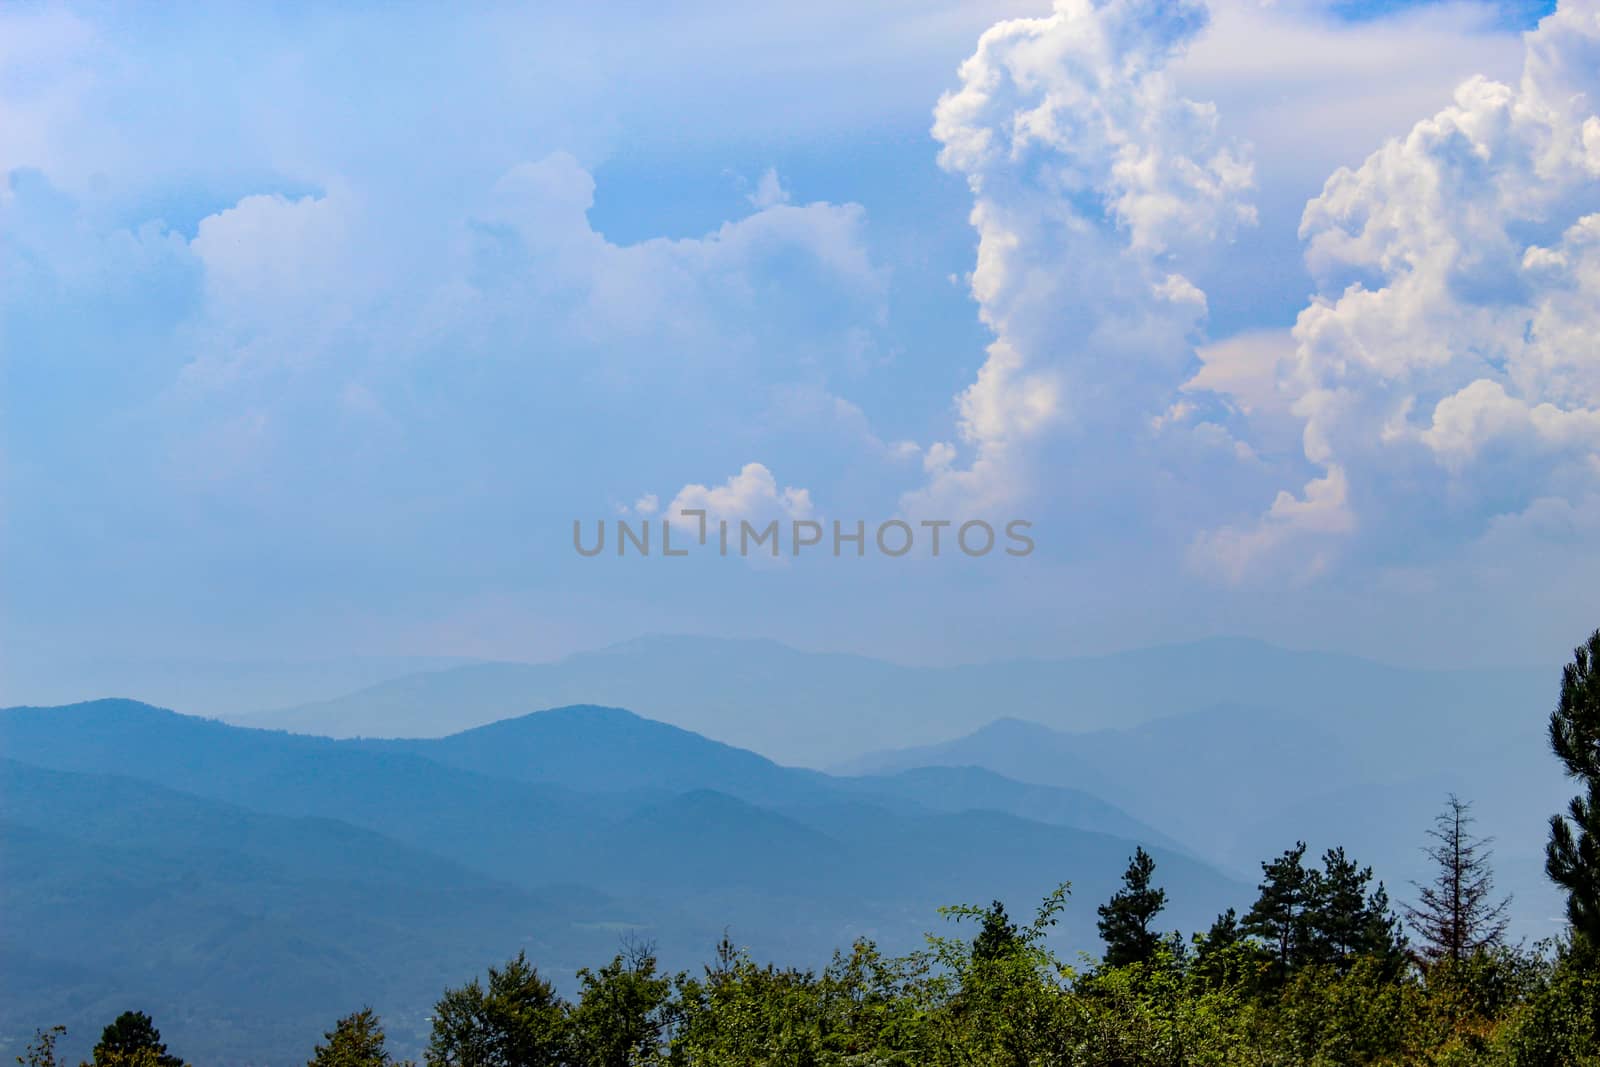 Forest at the bottom. Blue silhouette of a mountain in the distance, with clouds in the blue sky. Mountains and hills in the distance. by mahirrov